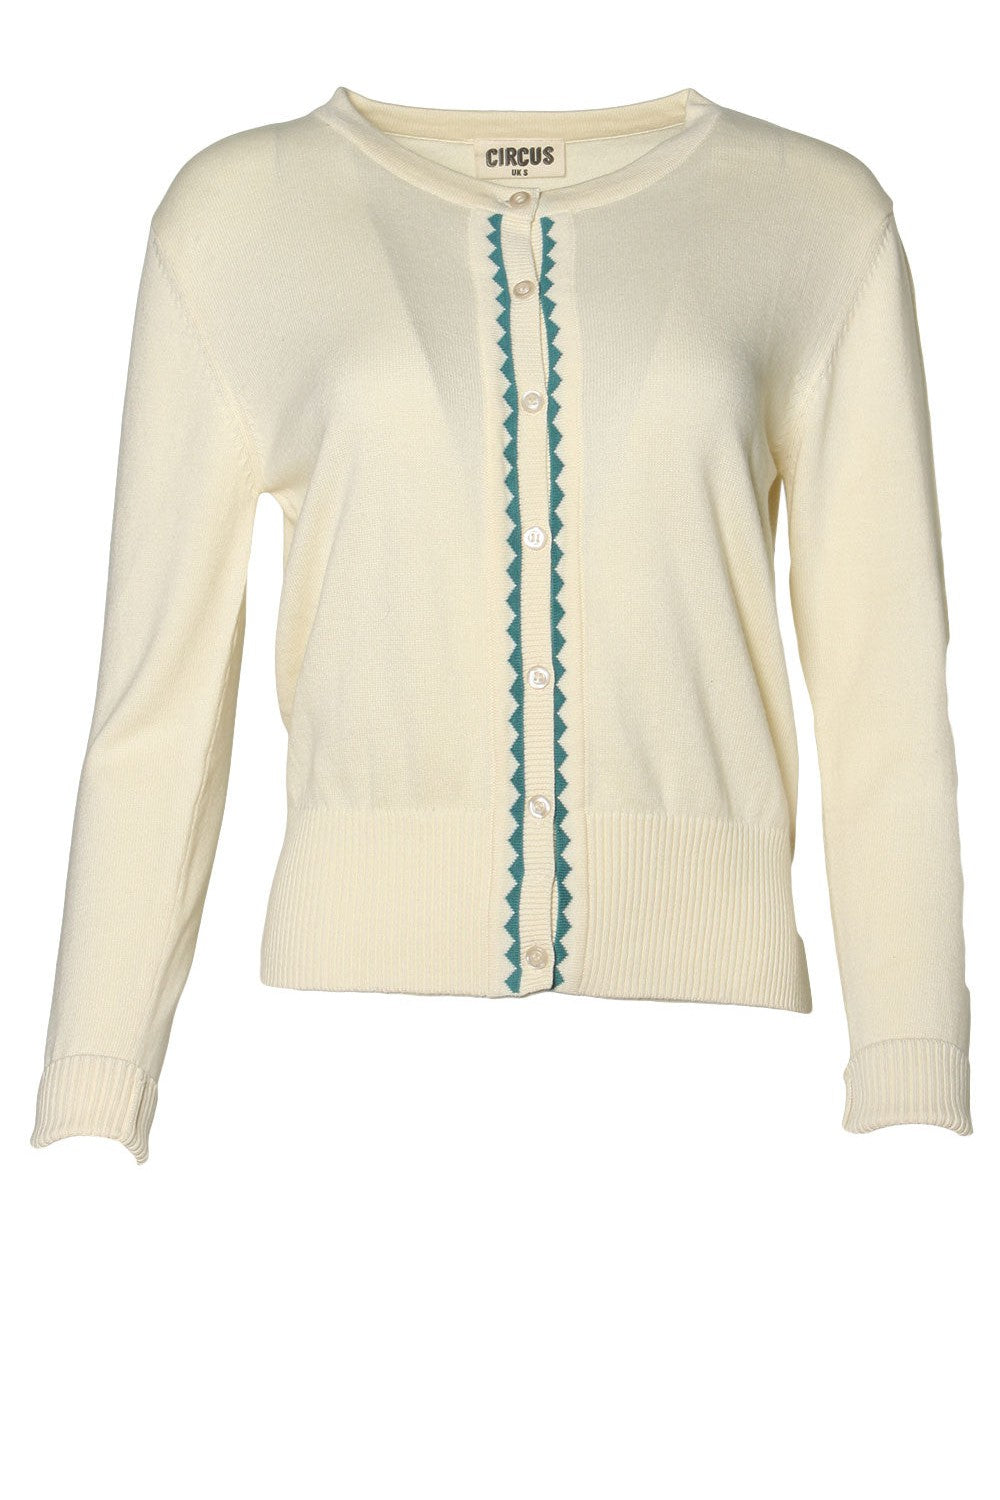 Circus Antique White/Teal Knit-Womens-Ohh! By Gum - Shop Sustainable